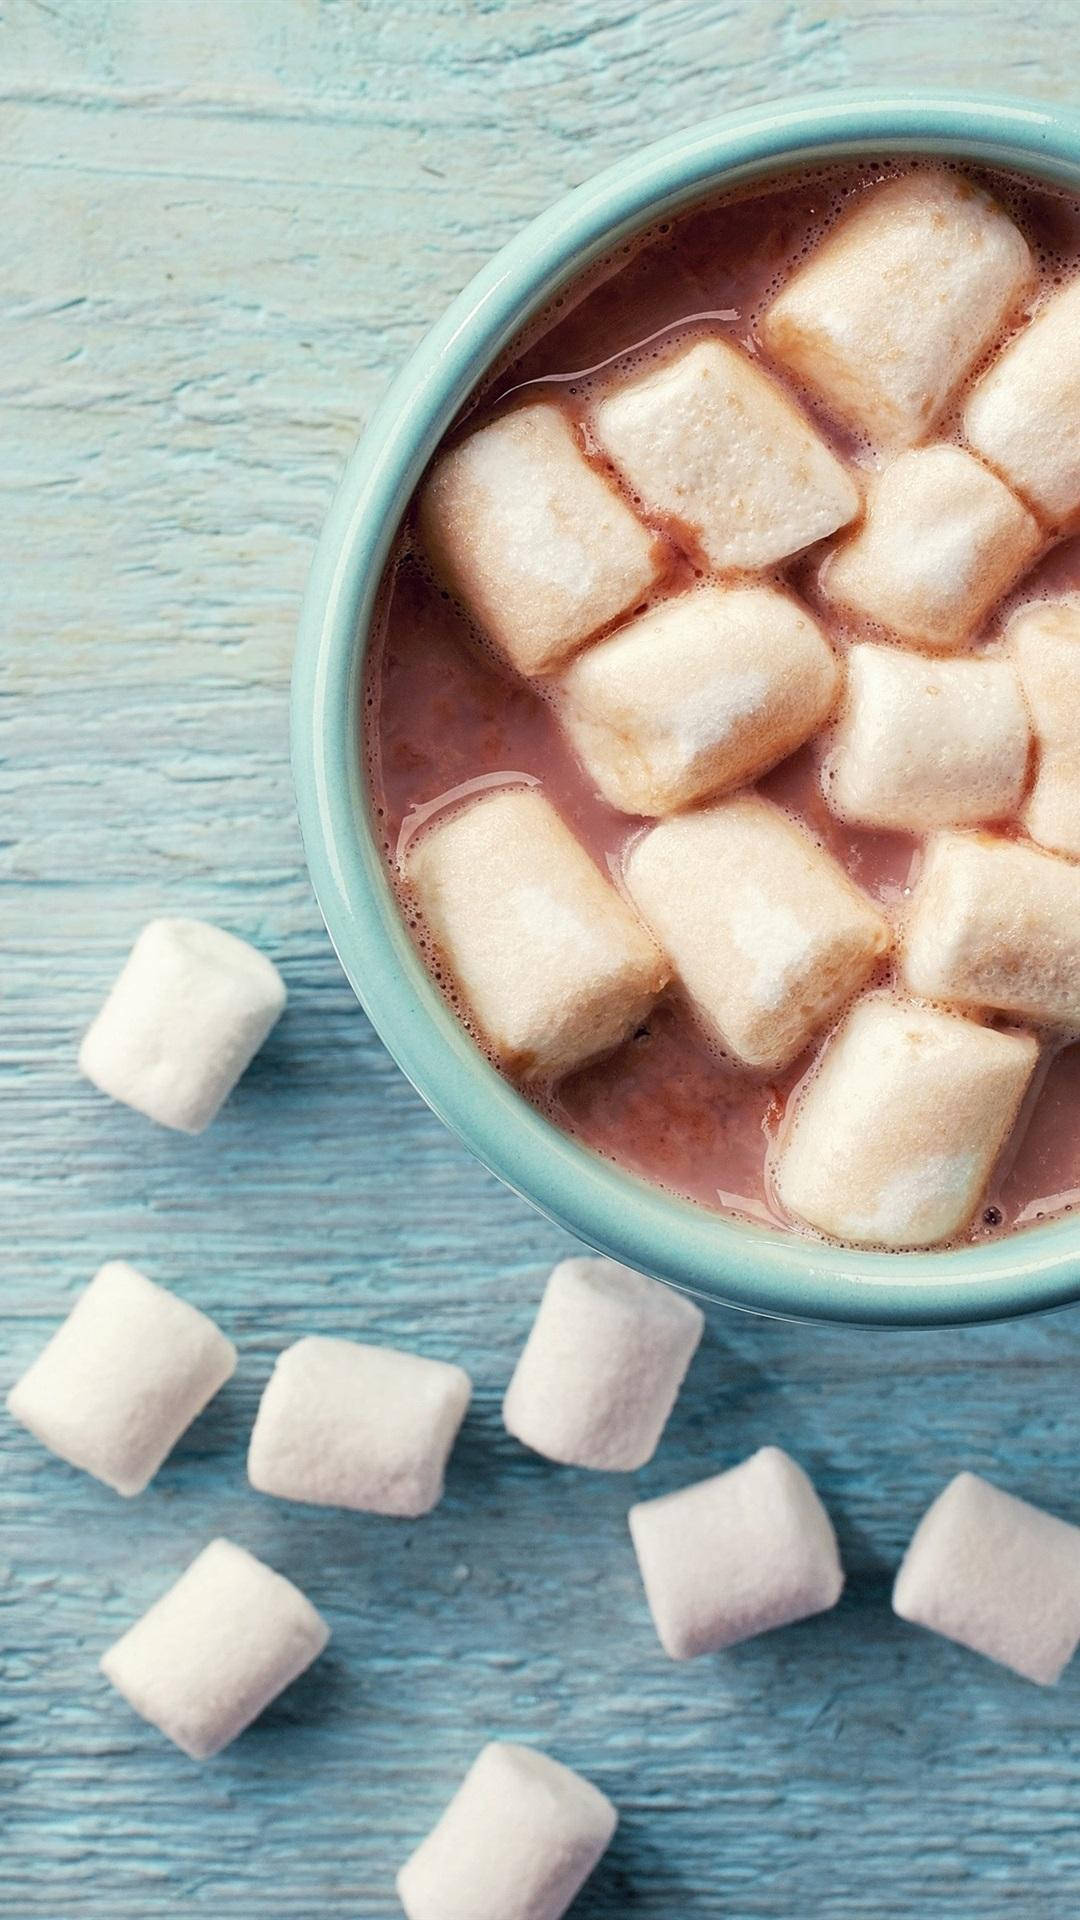 A cup of hot chocolate with marshmallows - Marshmallows